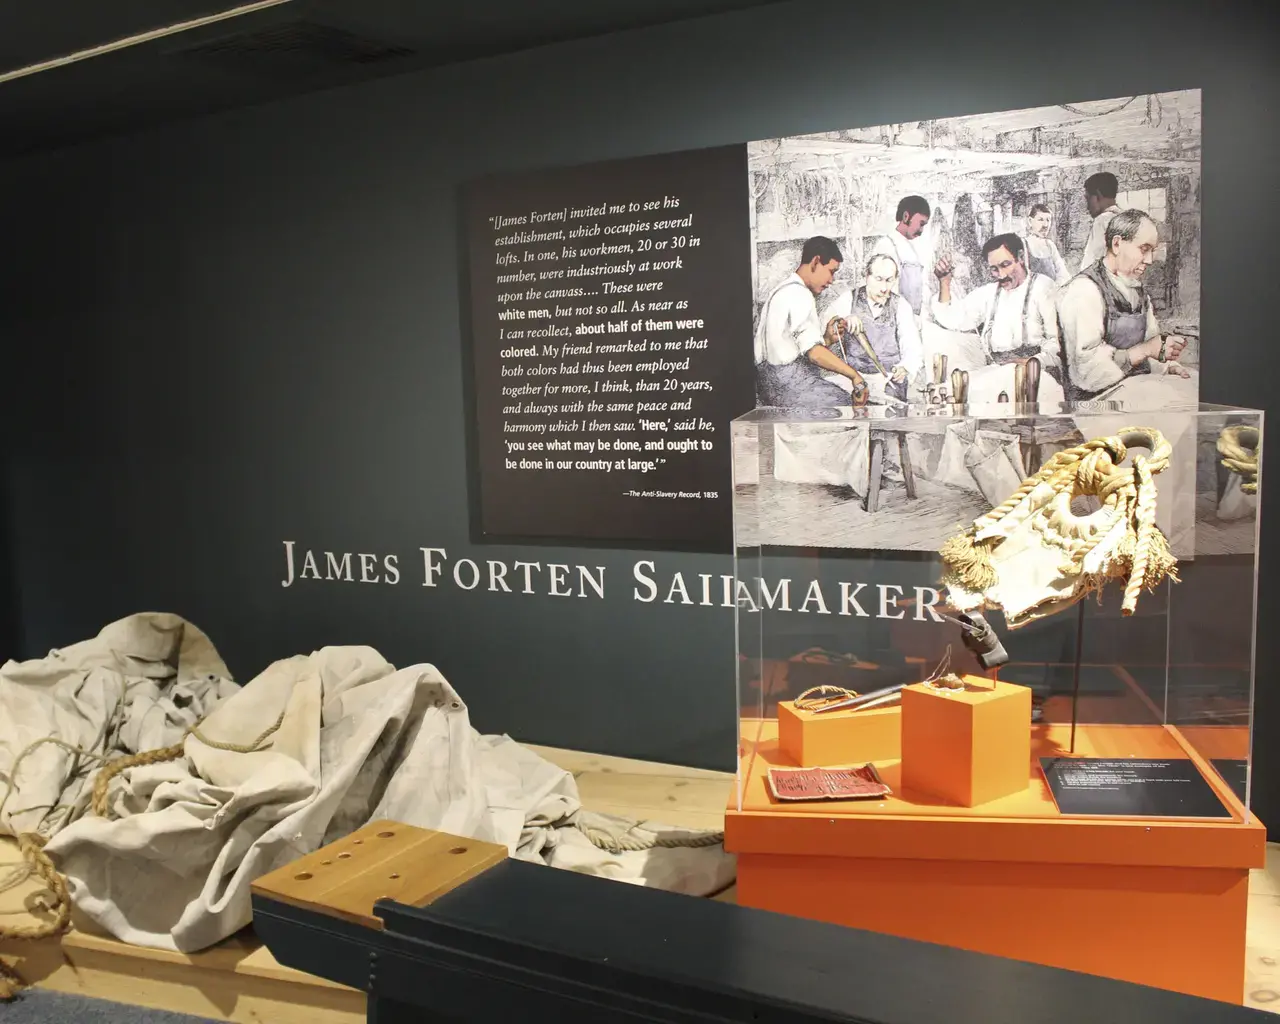 An exhibit about James Forten, a Philadelphia sailmaker who fought in the Revolutionary War and employed both white and black workmen who worked alongside one another, at Independence Seaport Museum.